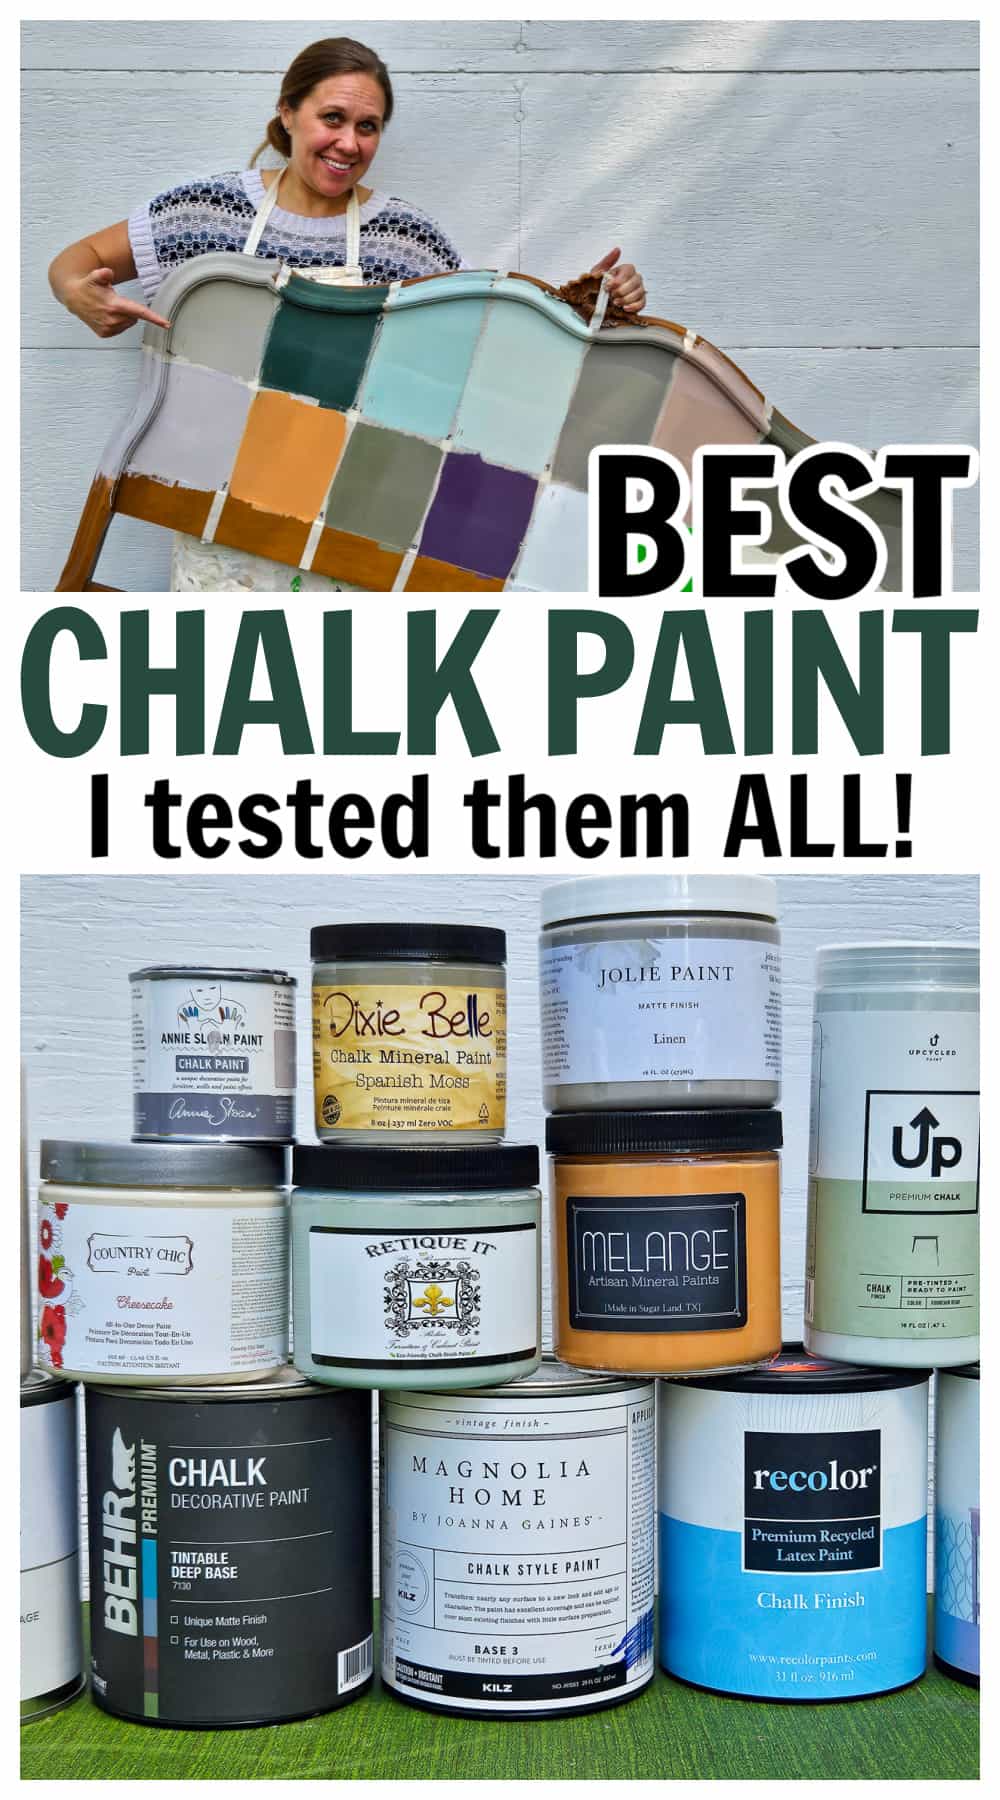 Best Chalk Paint For Furniture With Side By Side Brand Comparison 1 